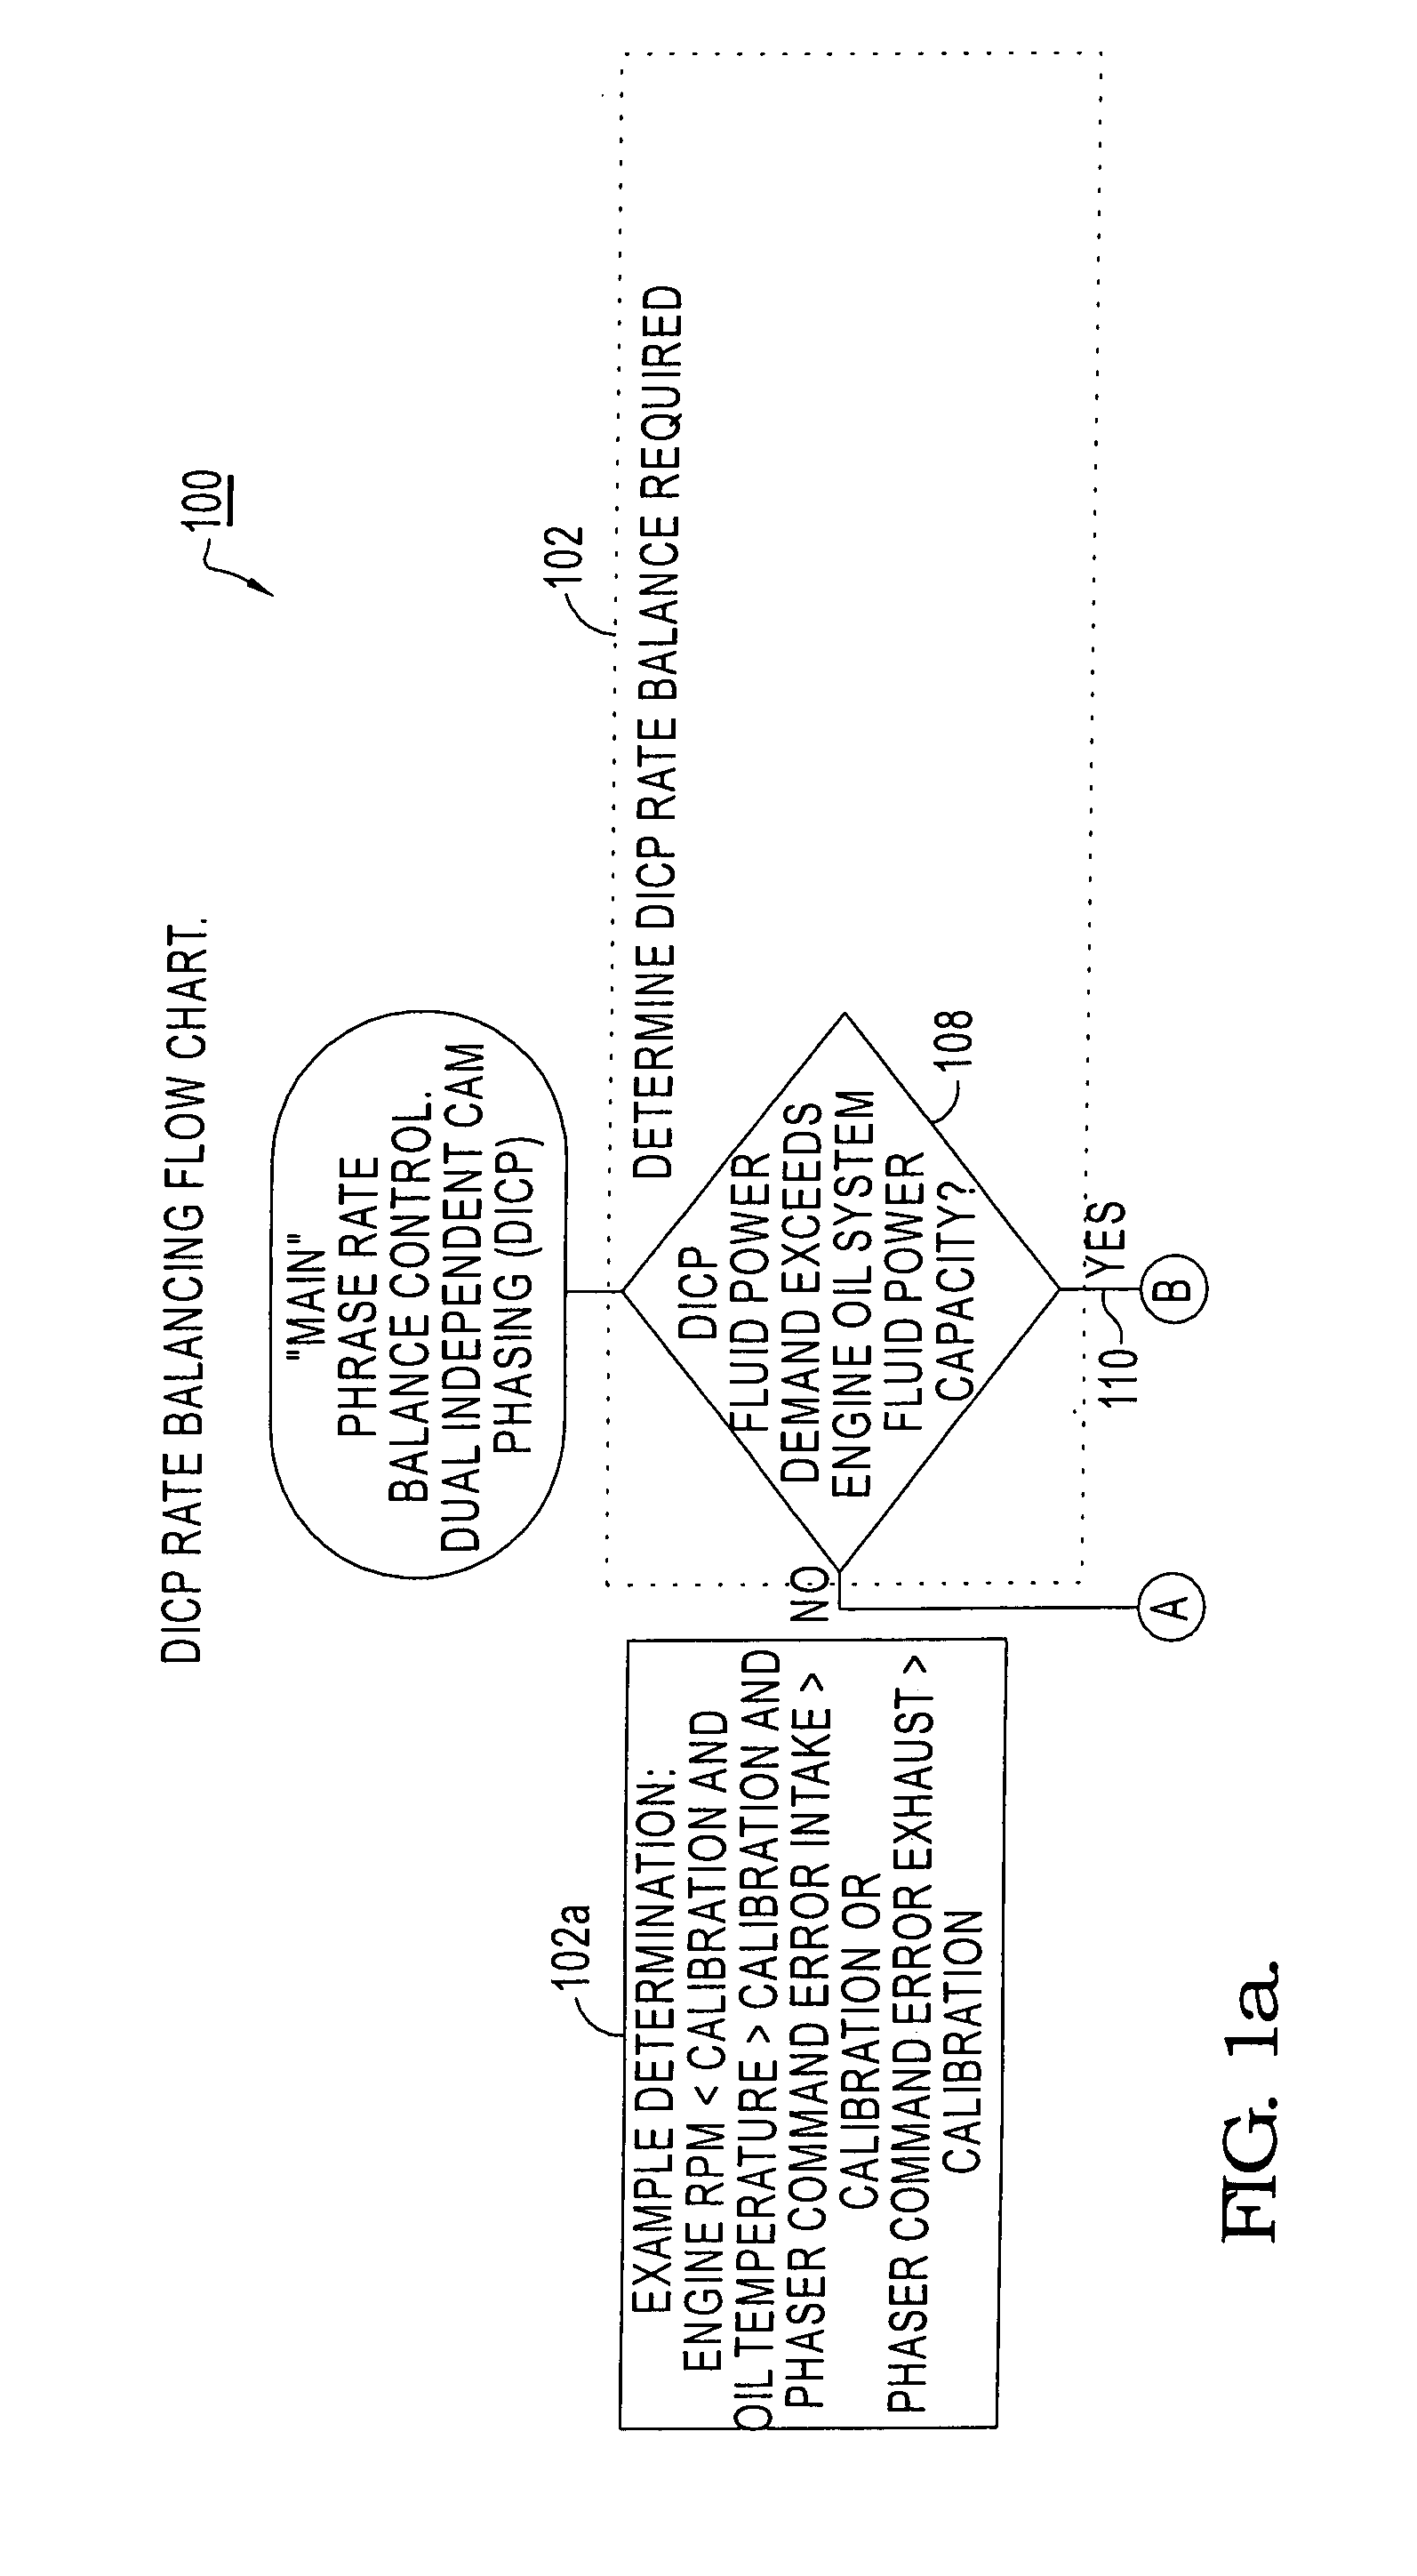 Rate limiting and balancing control system for dual independent camshaft phasing